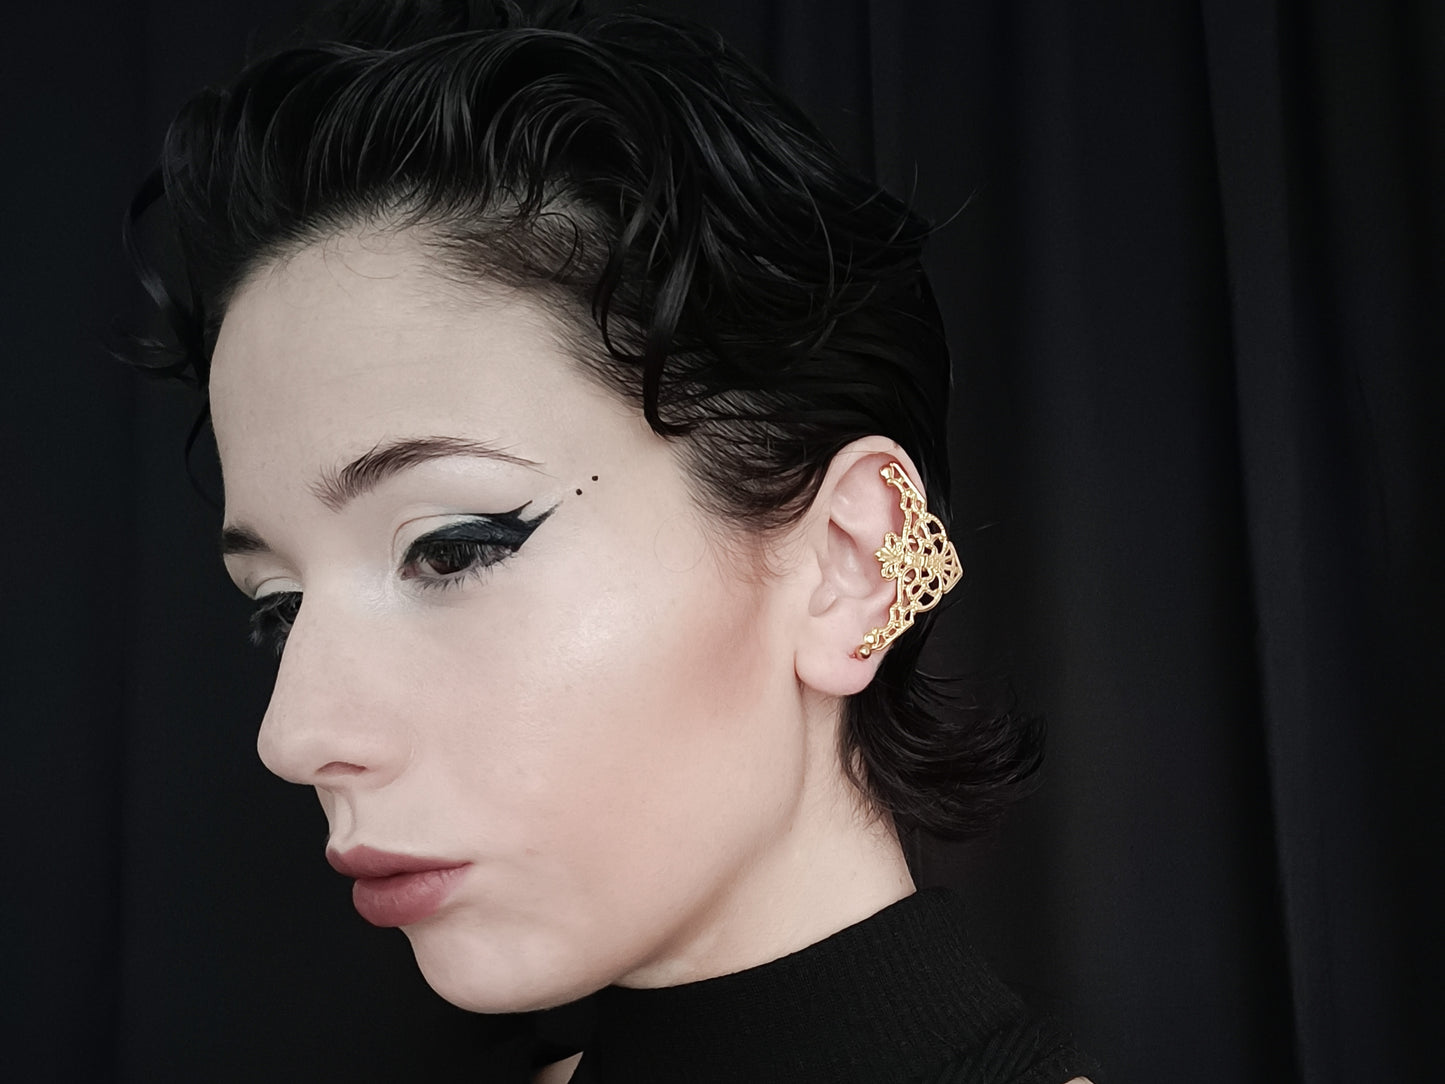 A profile view of a model wearing Myril Jewels' intricate gold cuff earrings, showcasing a neo-gothic design that complements the gothic and alternative style. The gold earrings feature an ornate filigree pattern that covers the ear with a touch of gothic-chic elegance, perfect for everyday wear or as a distinctive accent for festival jewels. Their elaborate craftsmanship captures the essence of Halloween jewelry, aligning with the whimsigoth and witchcore aesthetics